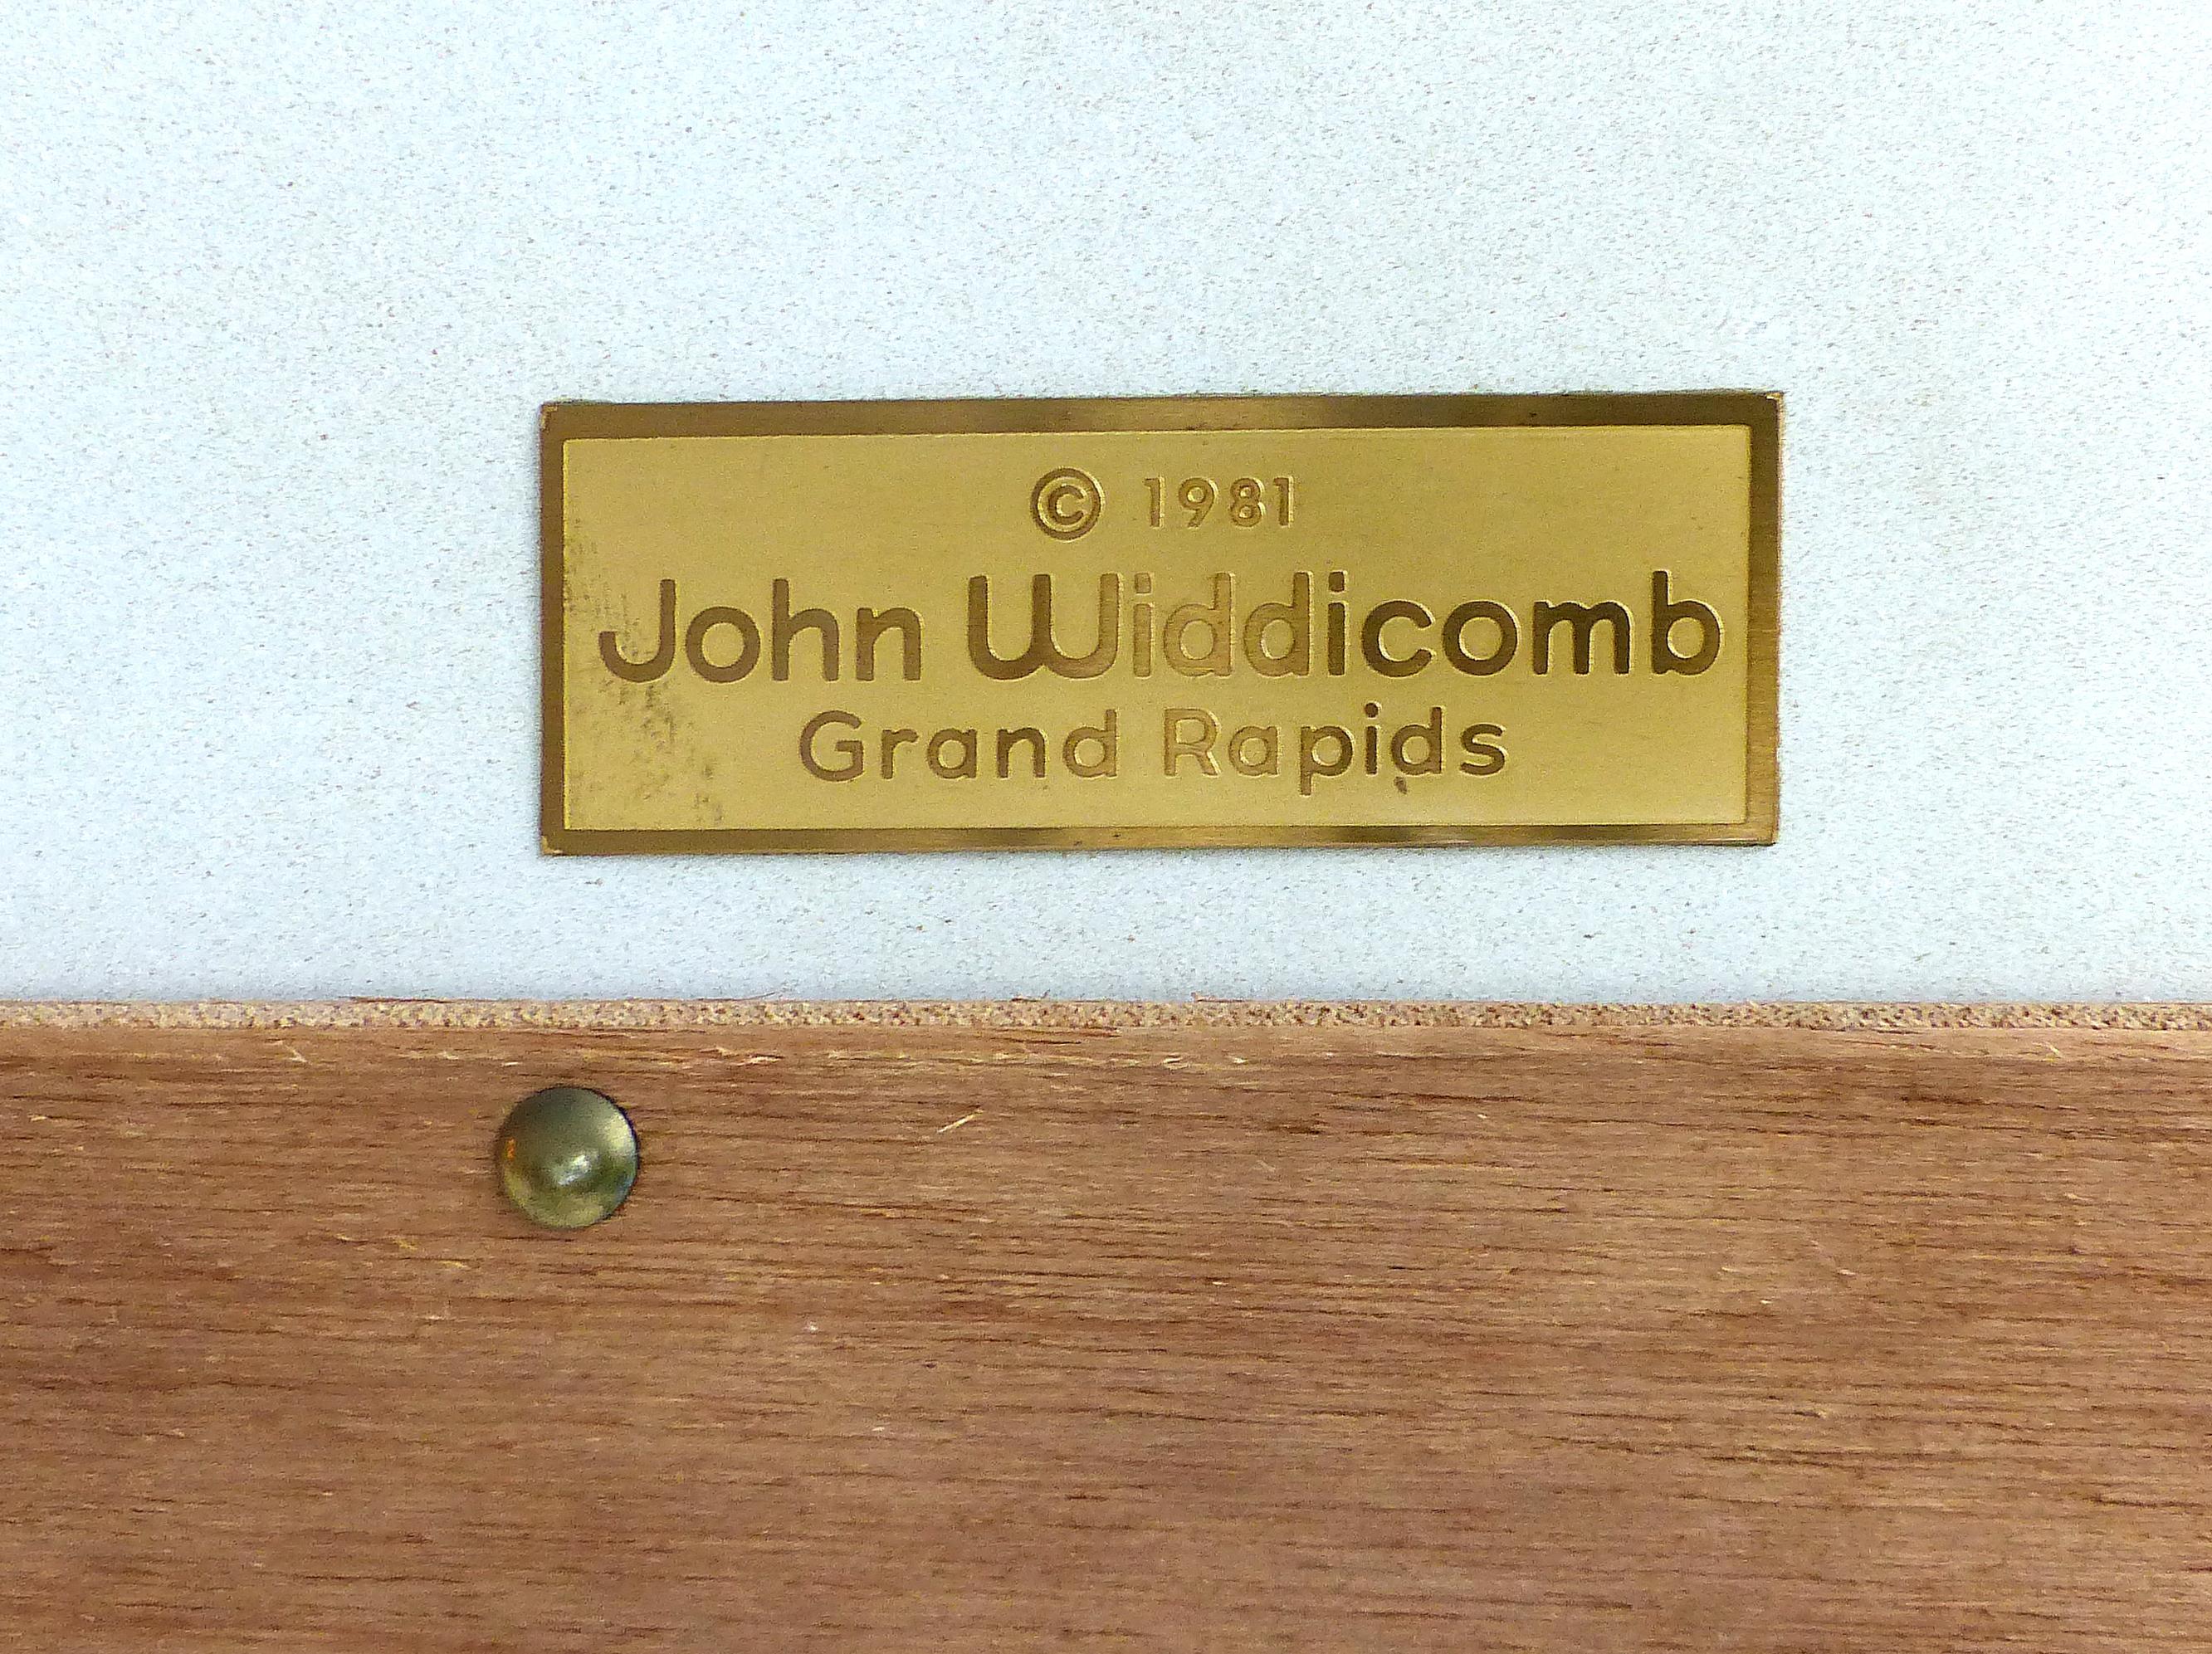 John Widdicomb Hand Painted Wood Mirror

Offered for sale is a hand painted wood mirror manufactured by the John Widdicomb. The frame has raised scrolled details and a subtle molded pediment and base. The mirror retains the Widdicomb metal tag on